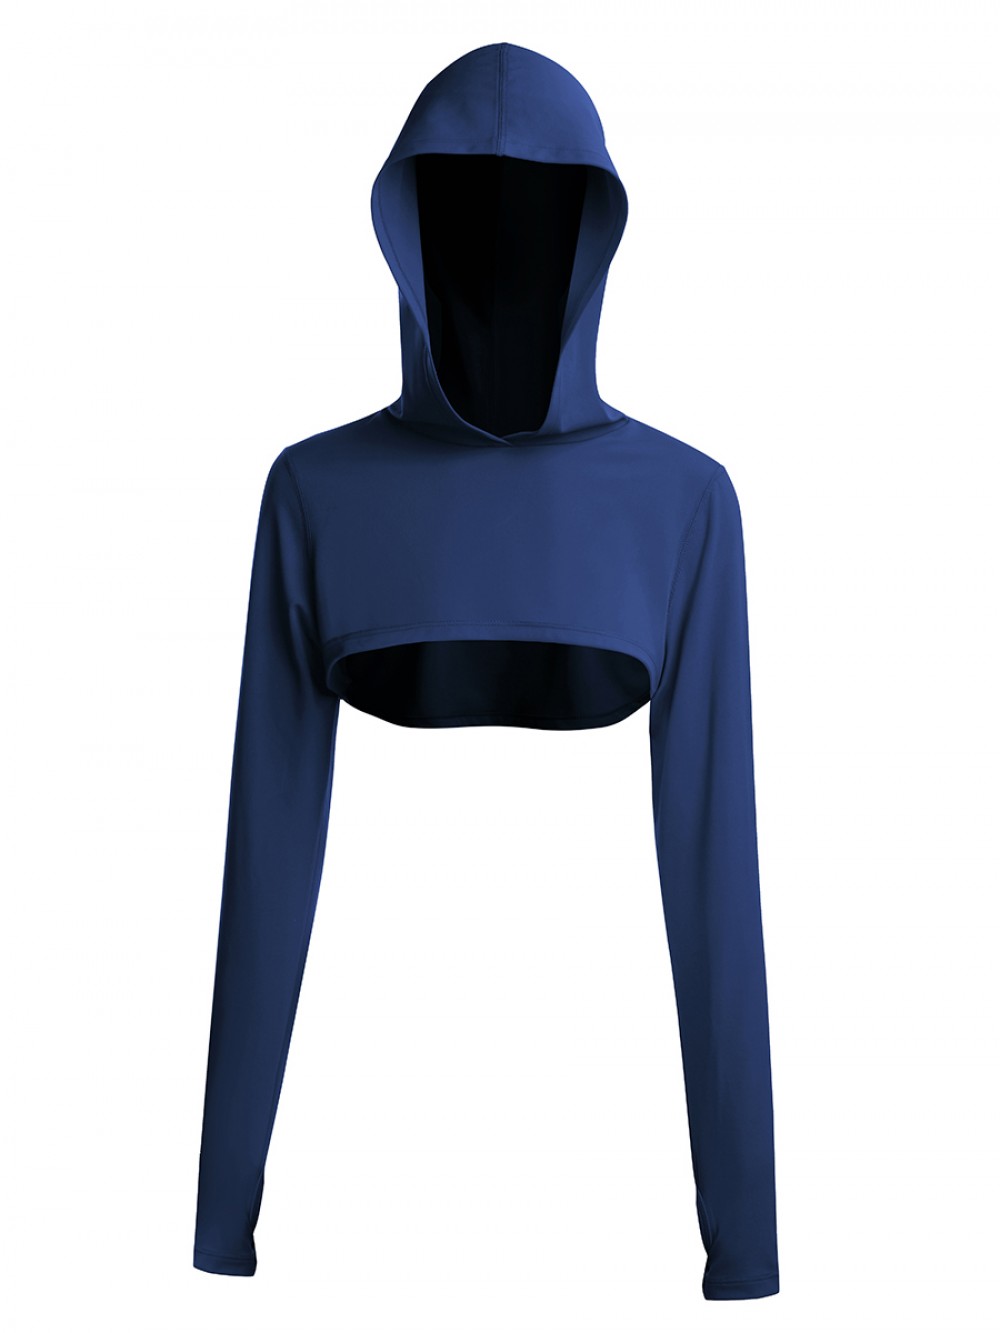 Navy Blue Thumbhole Full Sleeve Solid Color Gym Top Breathable